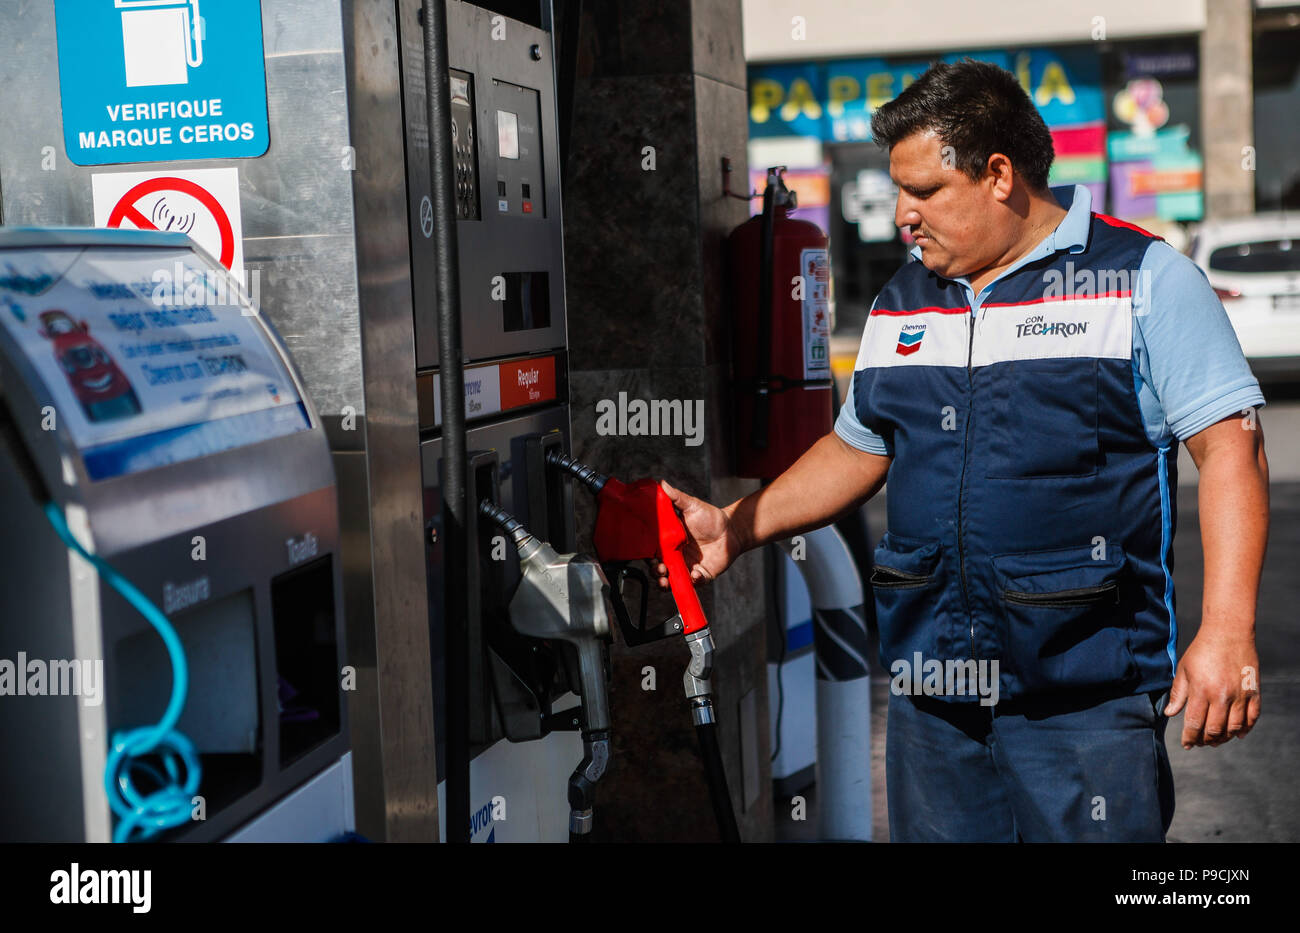 Chevron gas station in Mexico. Techron. Gas station. Gasoline service, diesel. hydrocarbons, mixture, petroleum, distillation, fuel, combustion Stock Photo